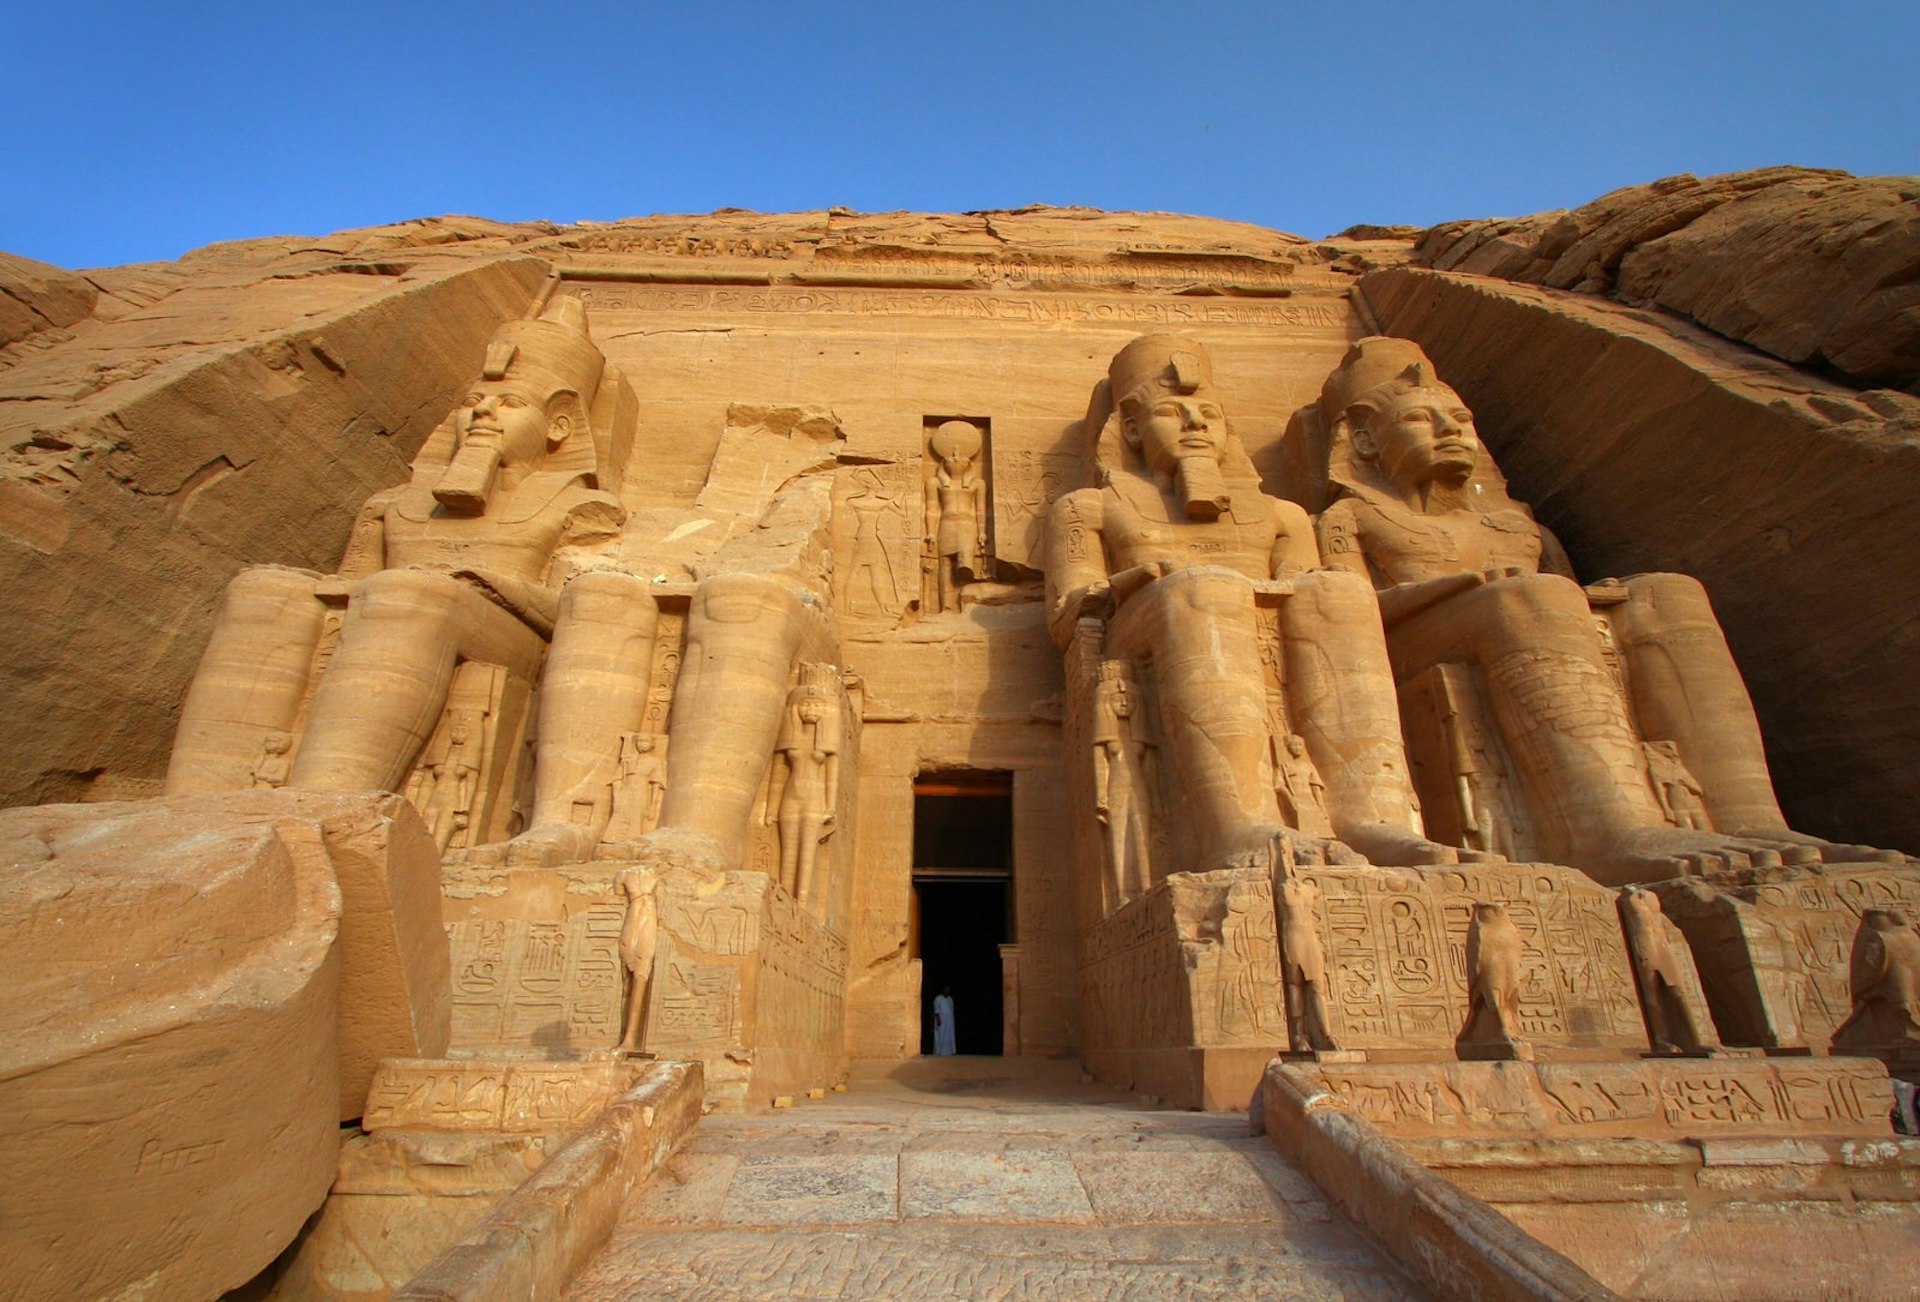 Statues of Ramses II in front of his temple at Abu Simbel. Image by Dan Breckwoldt / Shutterstock